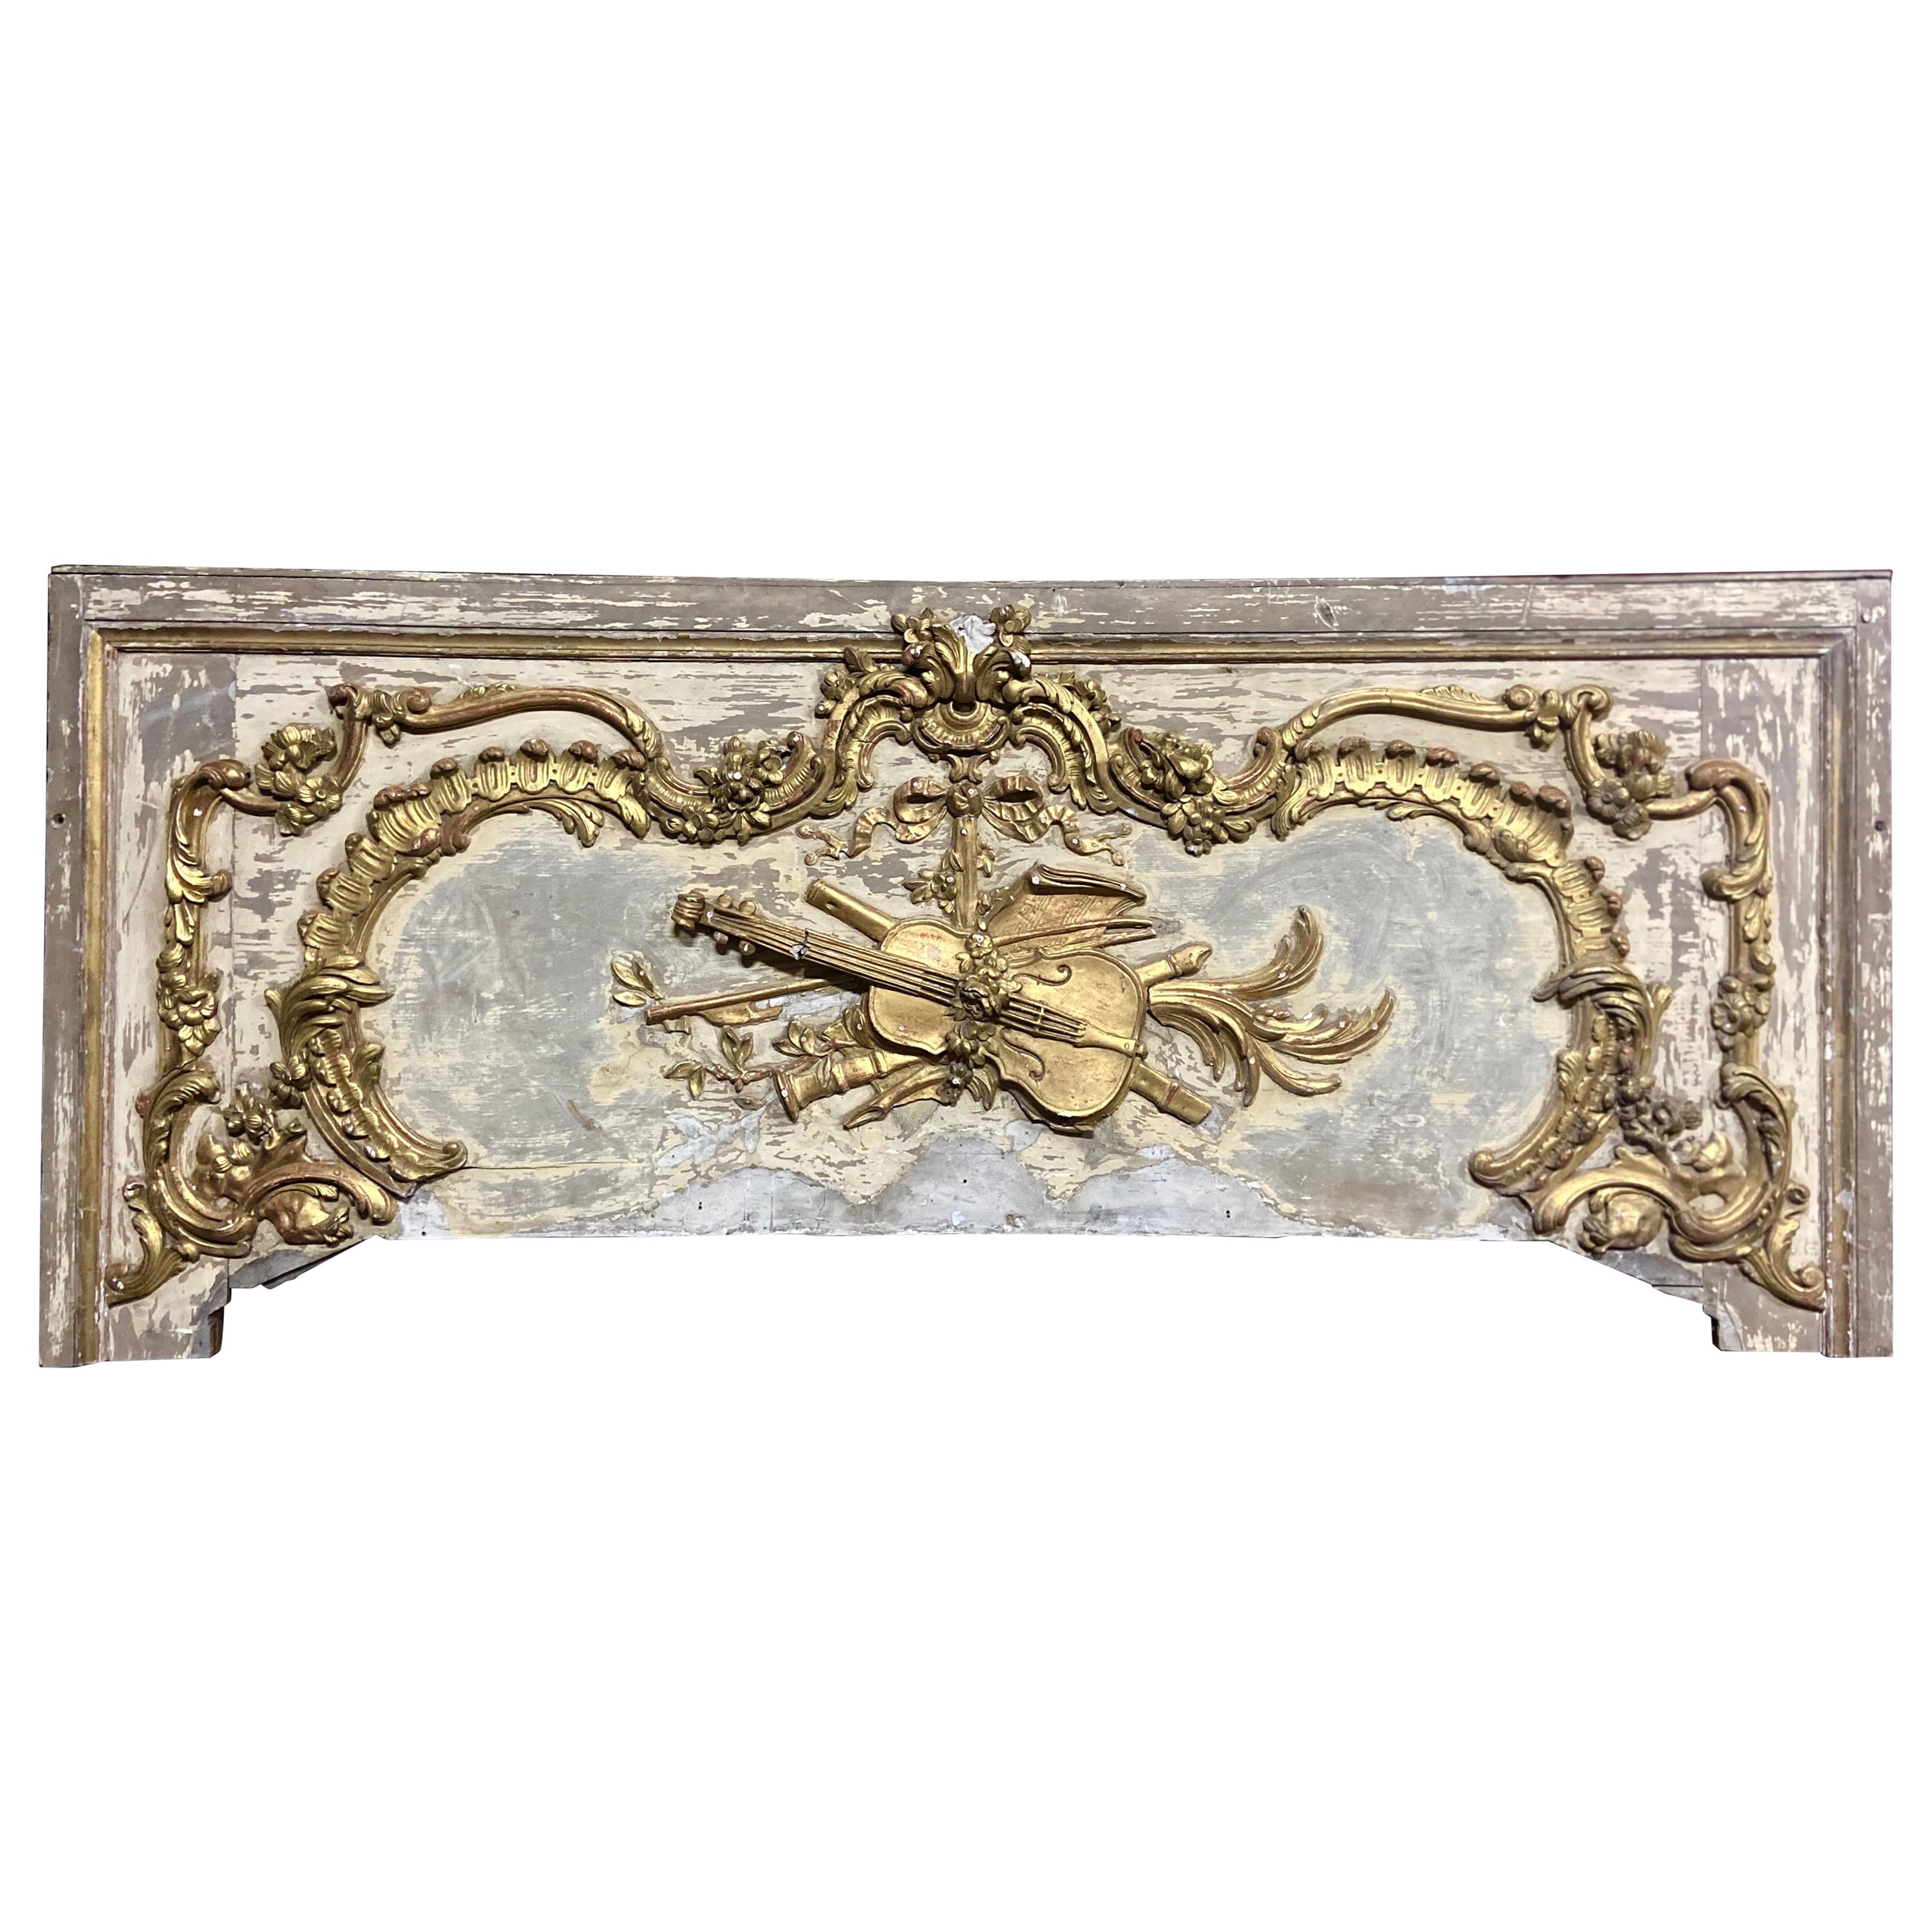 19th Century French Large Decorative Hand Carved Gilt Wood Element or Headboard For Sale